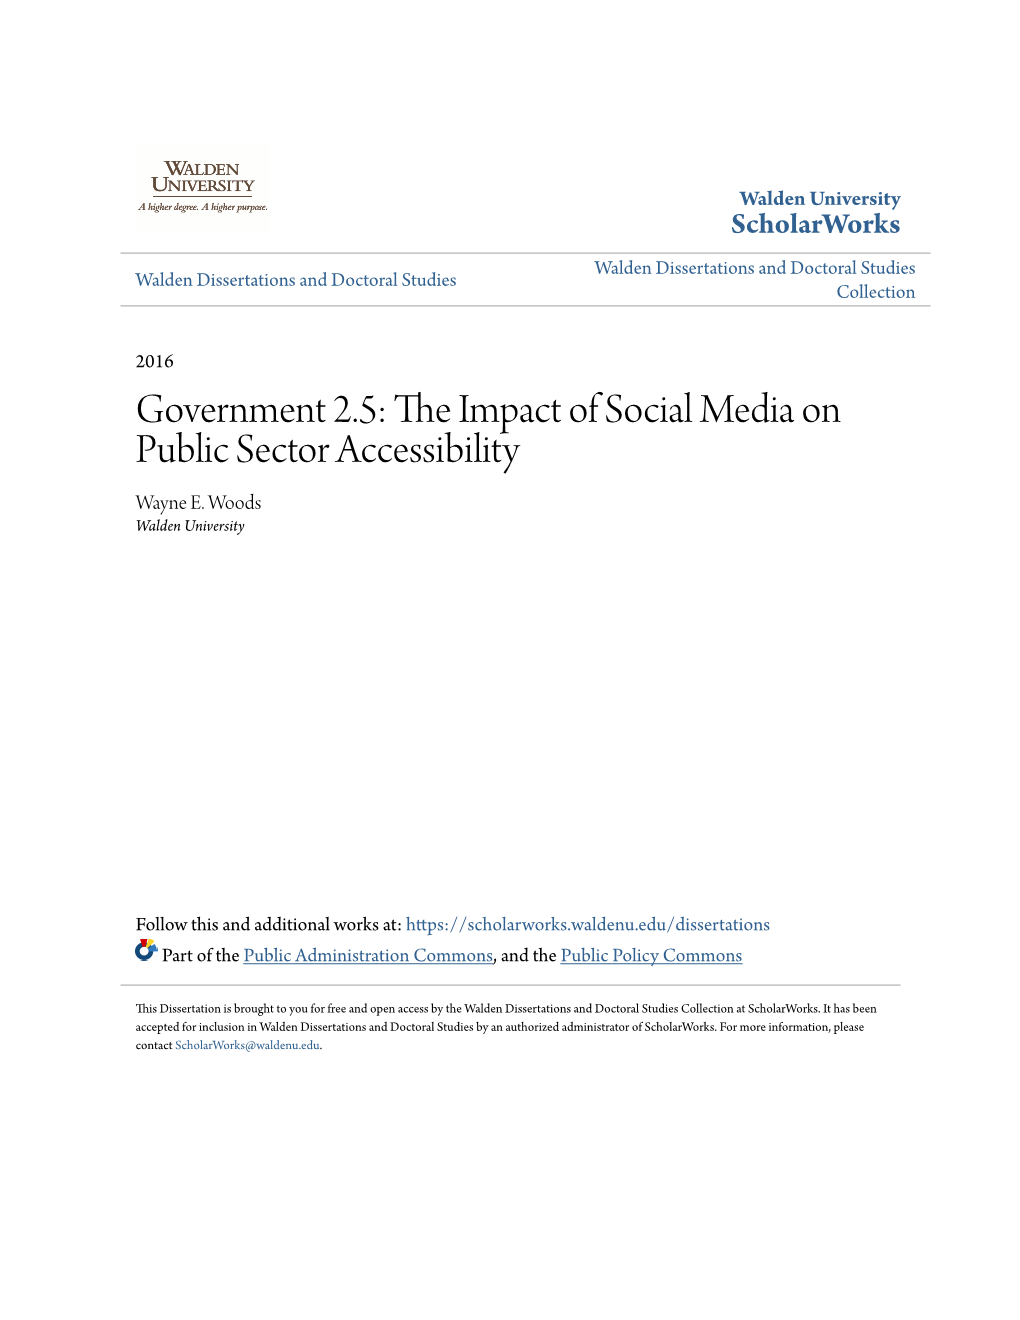 The Impact of Social Media on Public Sector Accessibility